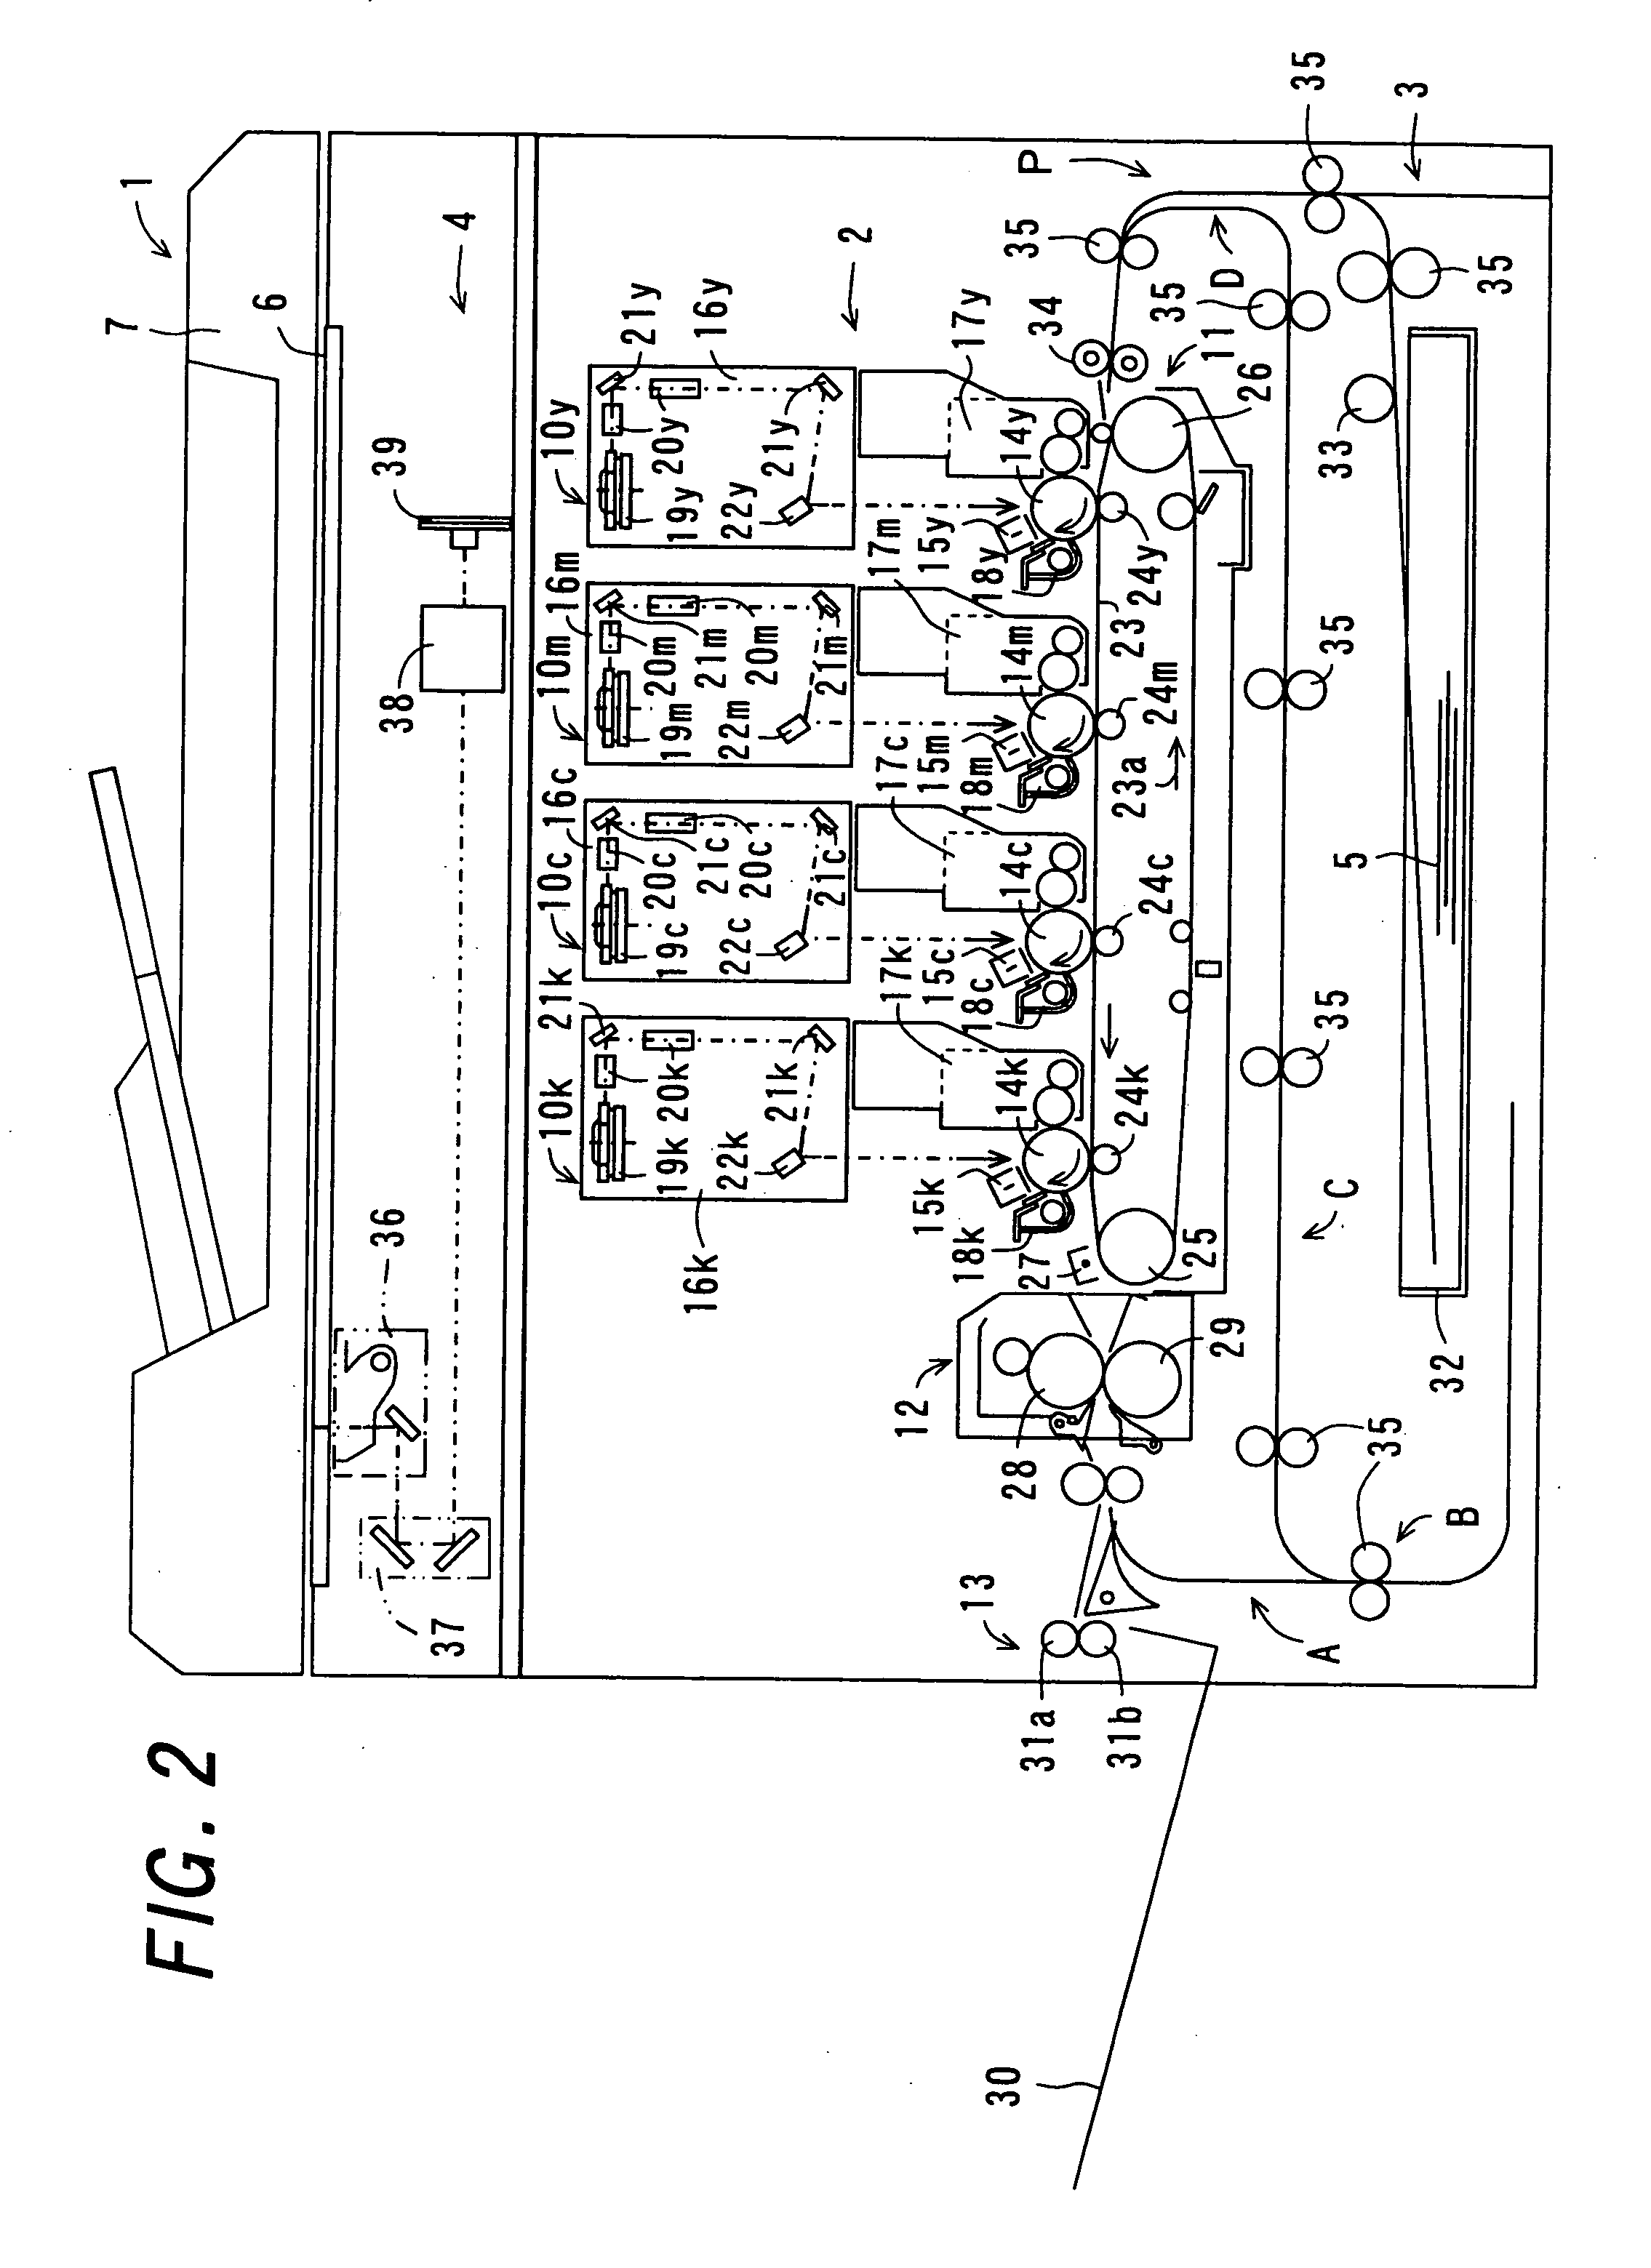 Non-magnetic toner, two-component developer, and image forming apparatus